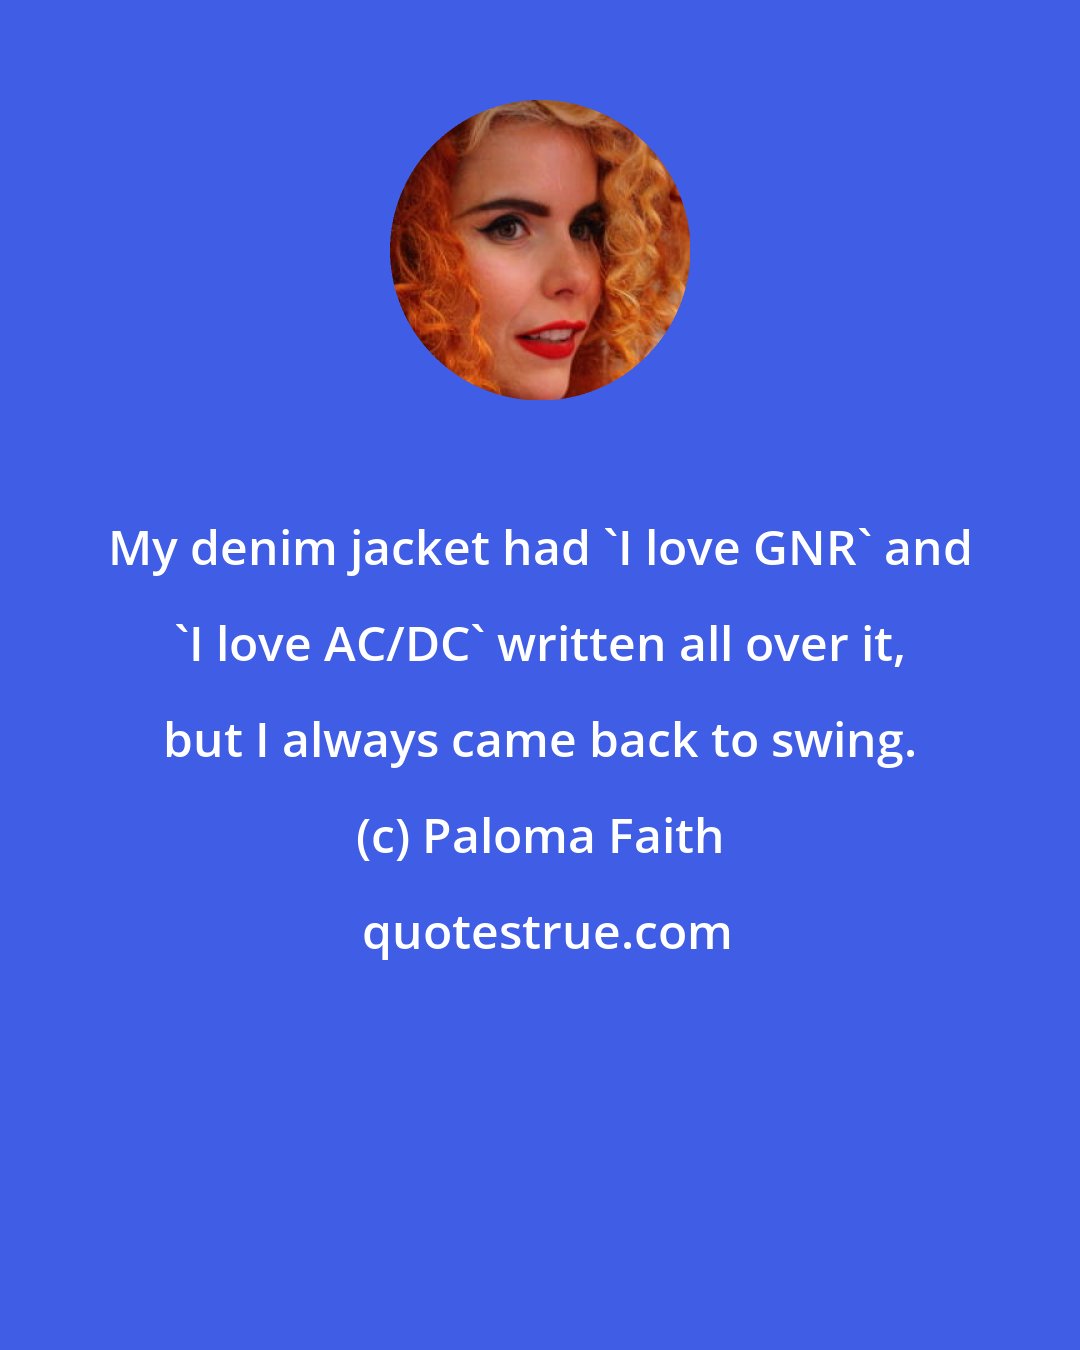 Paloma Faith: My denim jacket had 'I love GNR' and 'I love AC/DC' written all over it, but I always came back to swing.